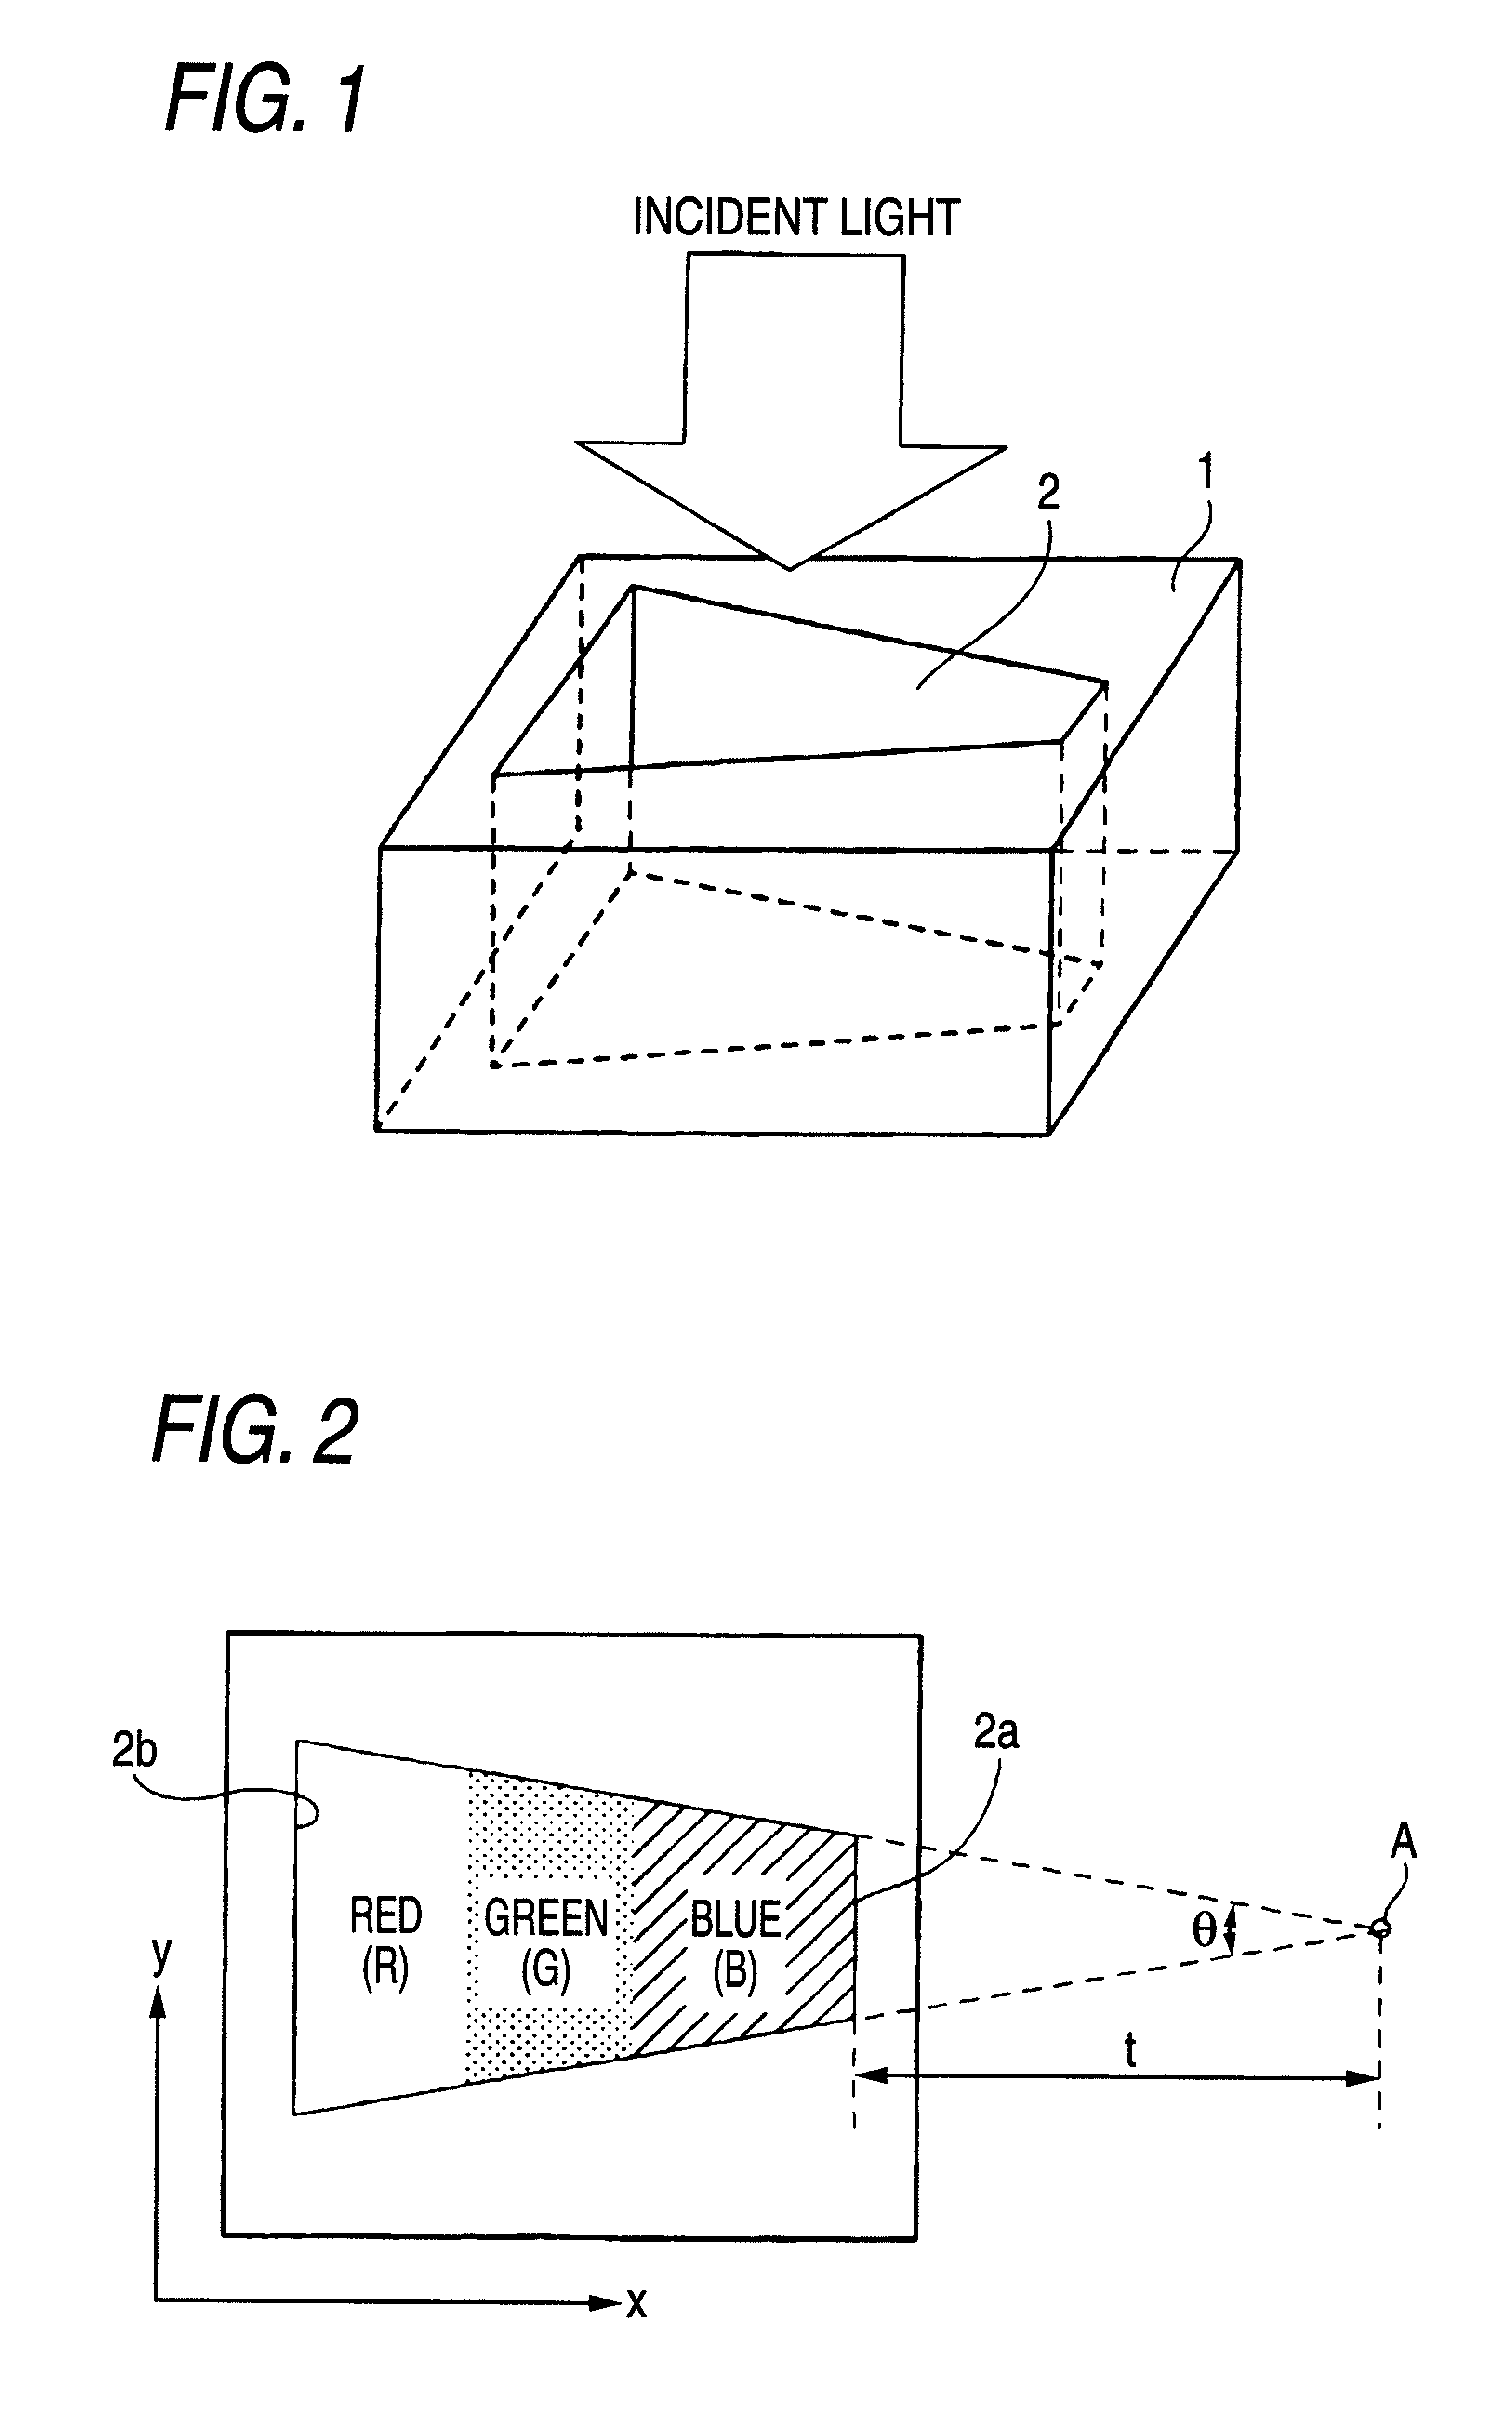 Solid-state imaging device for color imaging